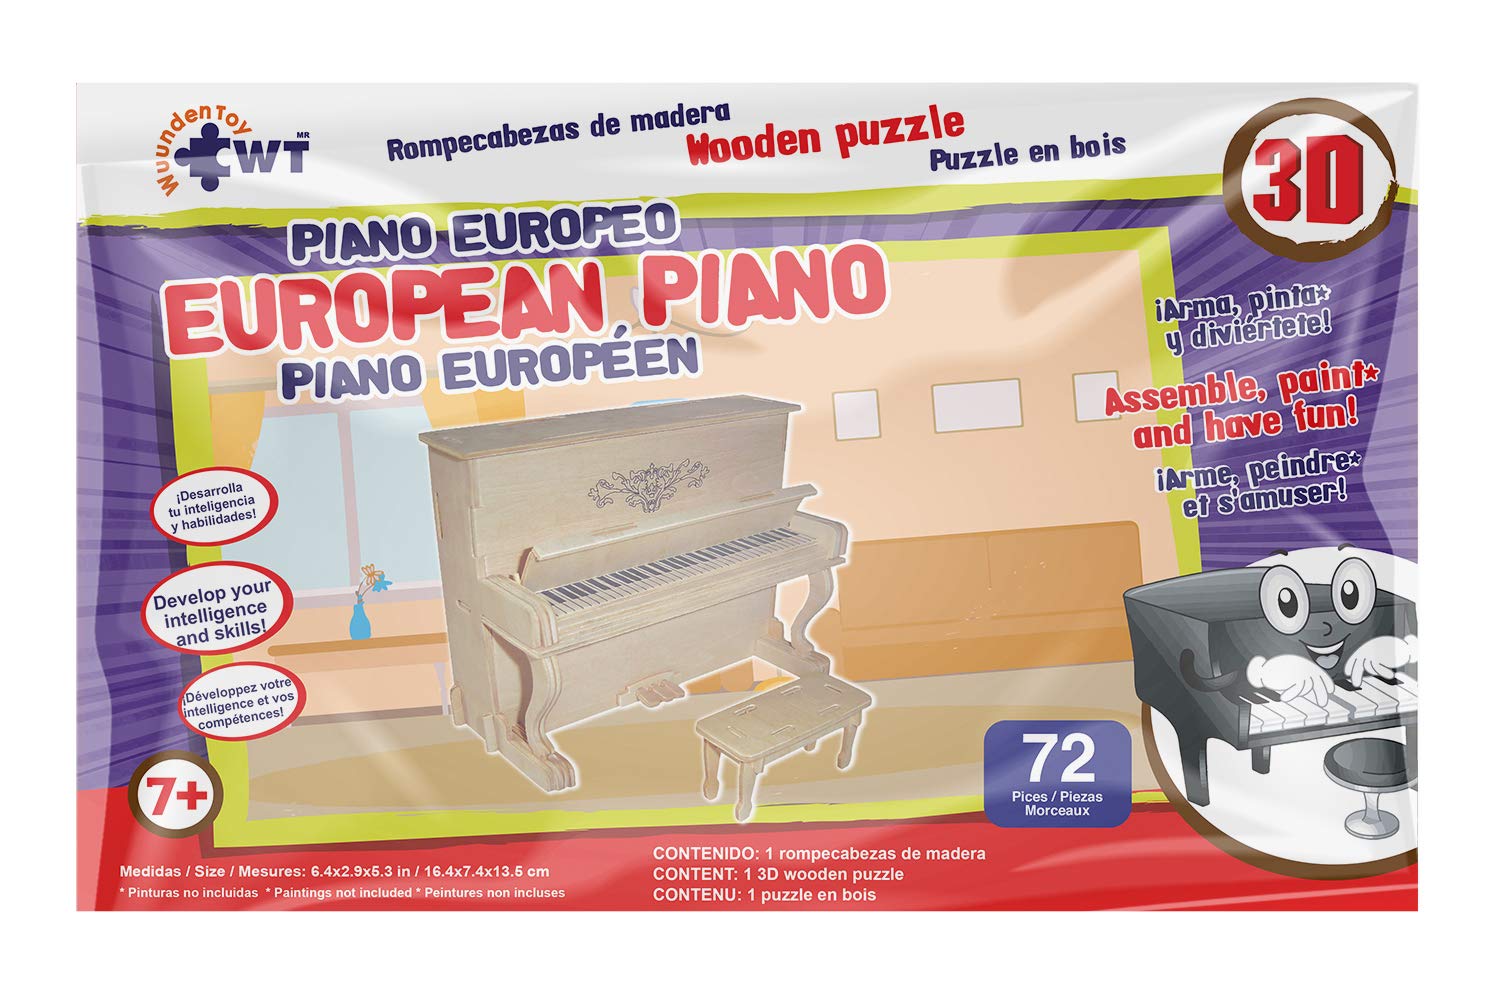 European Piano Stem Brain Teasers 3D Wooden Animal Puzzles